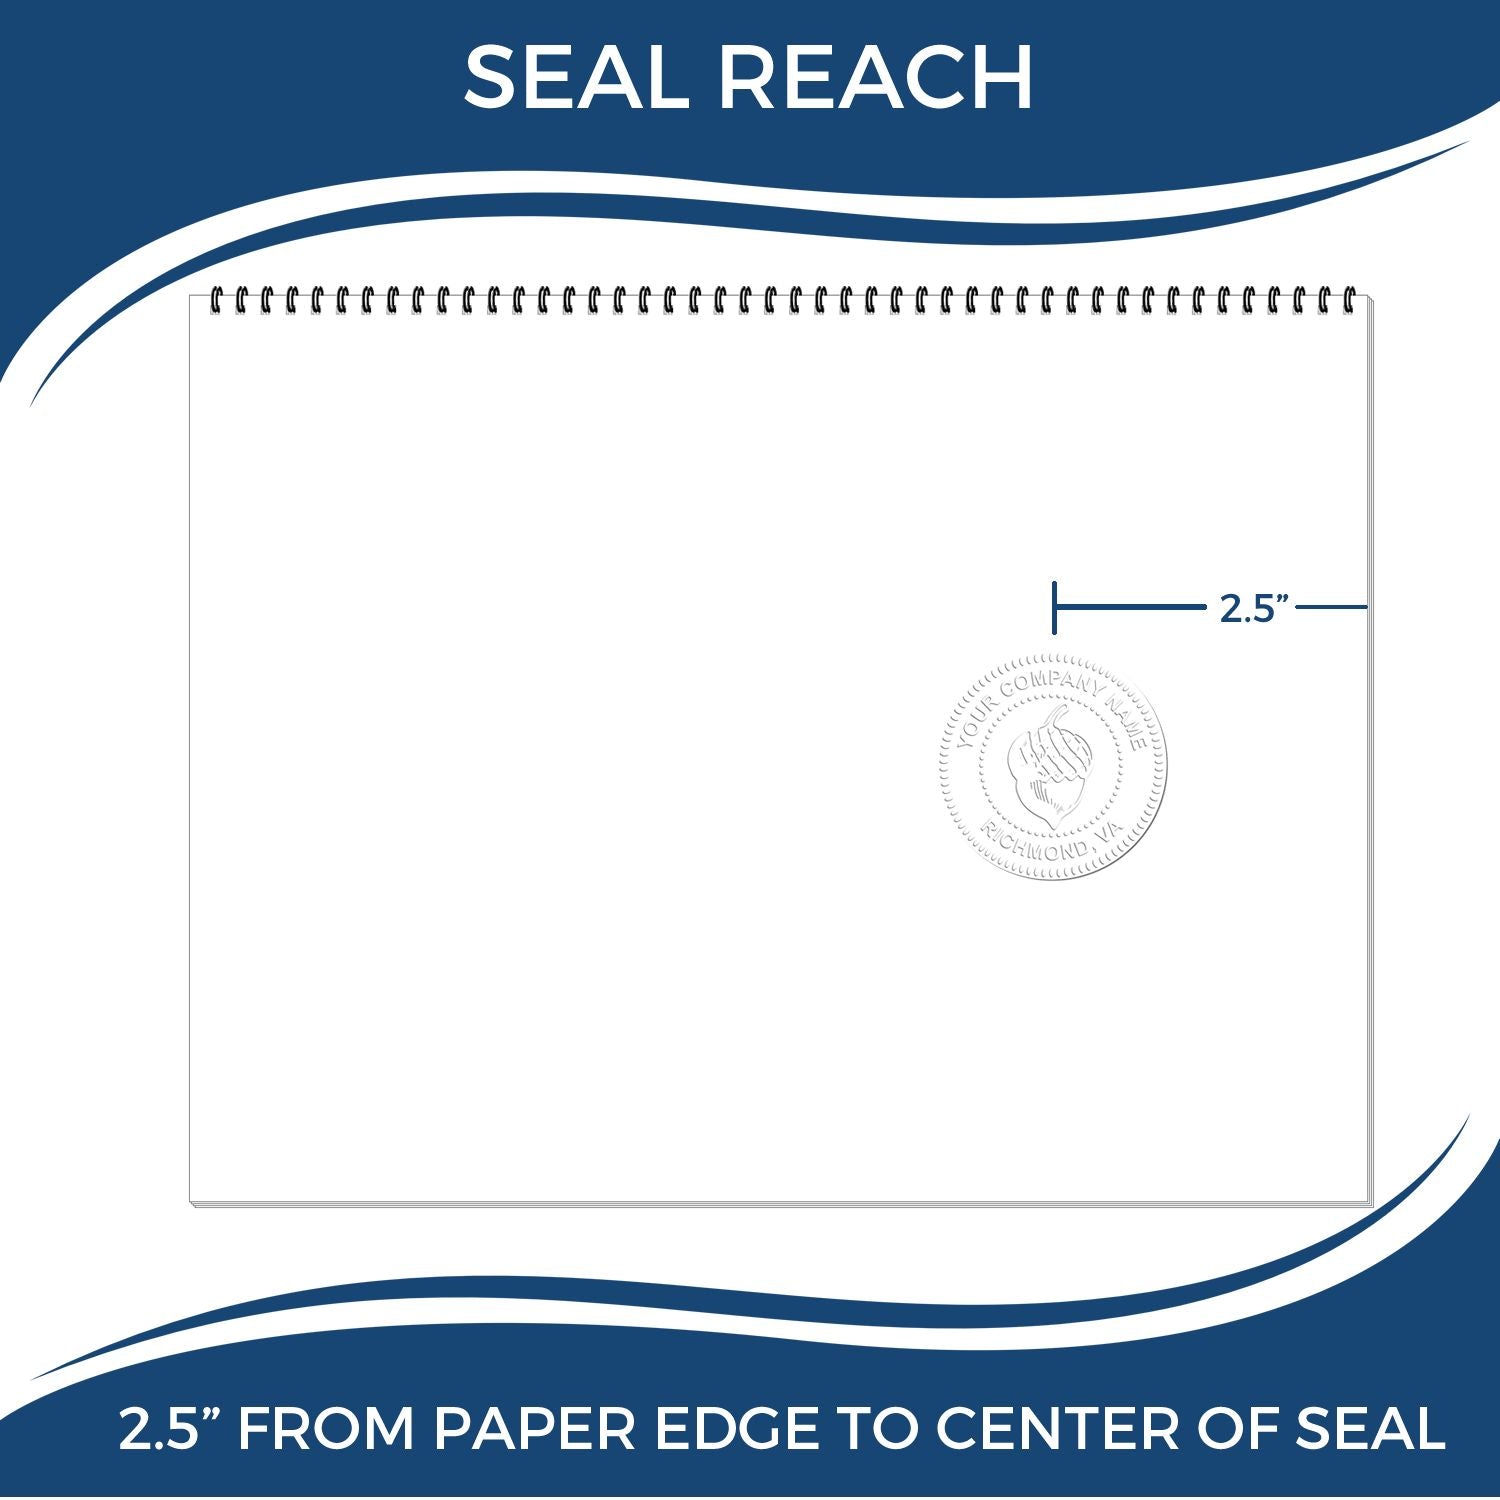 An infographic showing the seal reach which is represented by a ruler and a miniature seal image of the Heavy Duty Cast Iron Idaho Geologist Seal Embosser